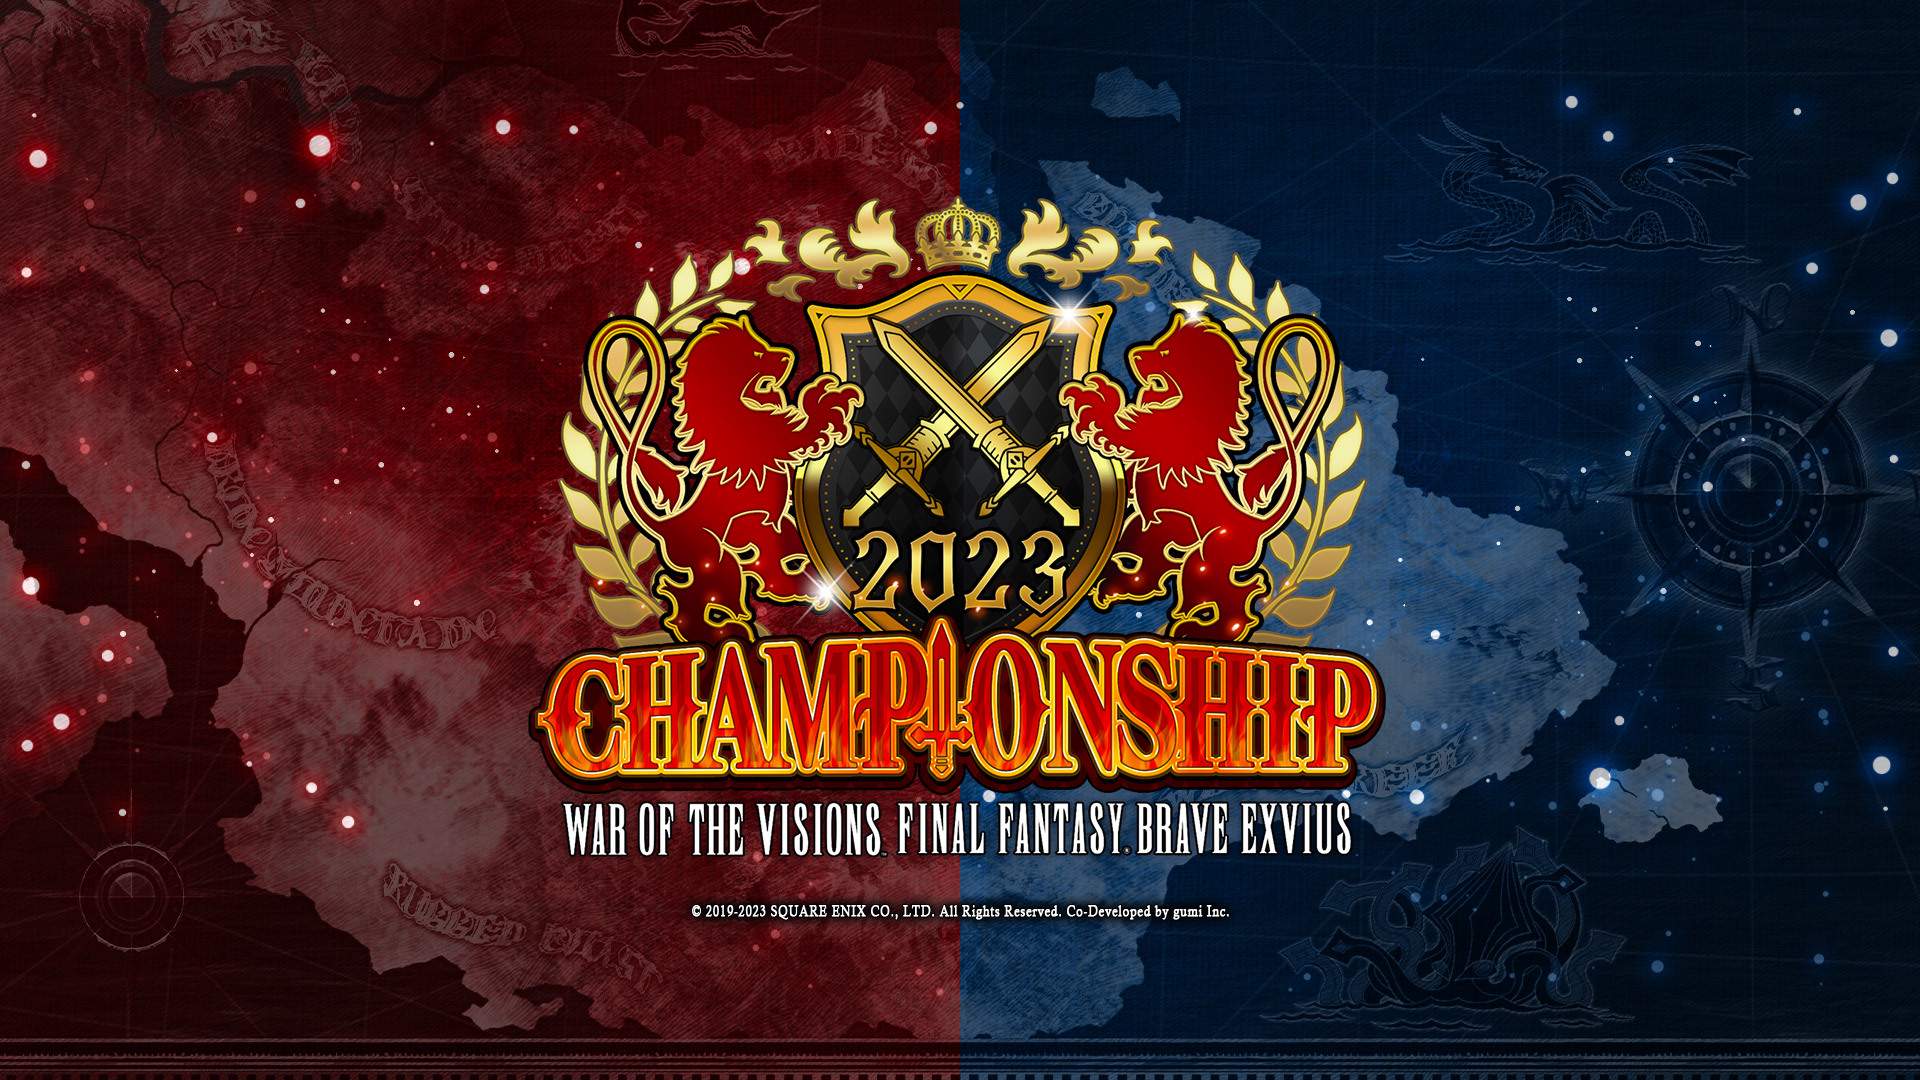 WAR OF THE VISIONS FINAL  FANTASY BRAVE EXVIUS CHAMPIONSHIP 2023